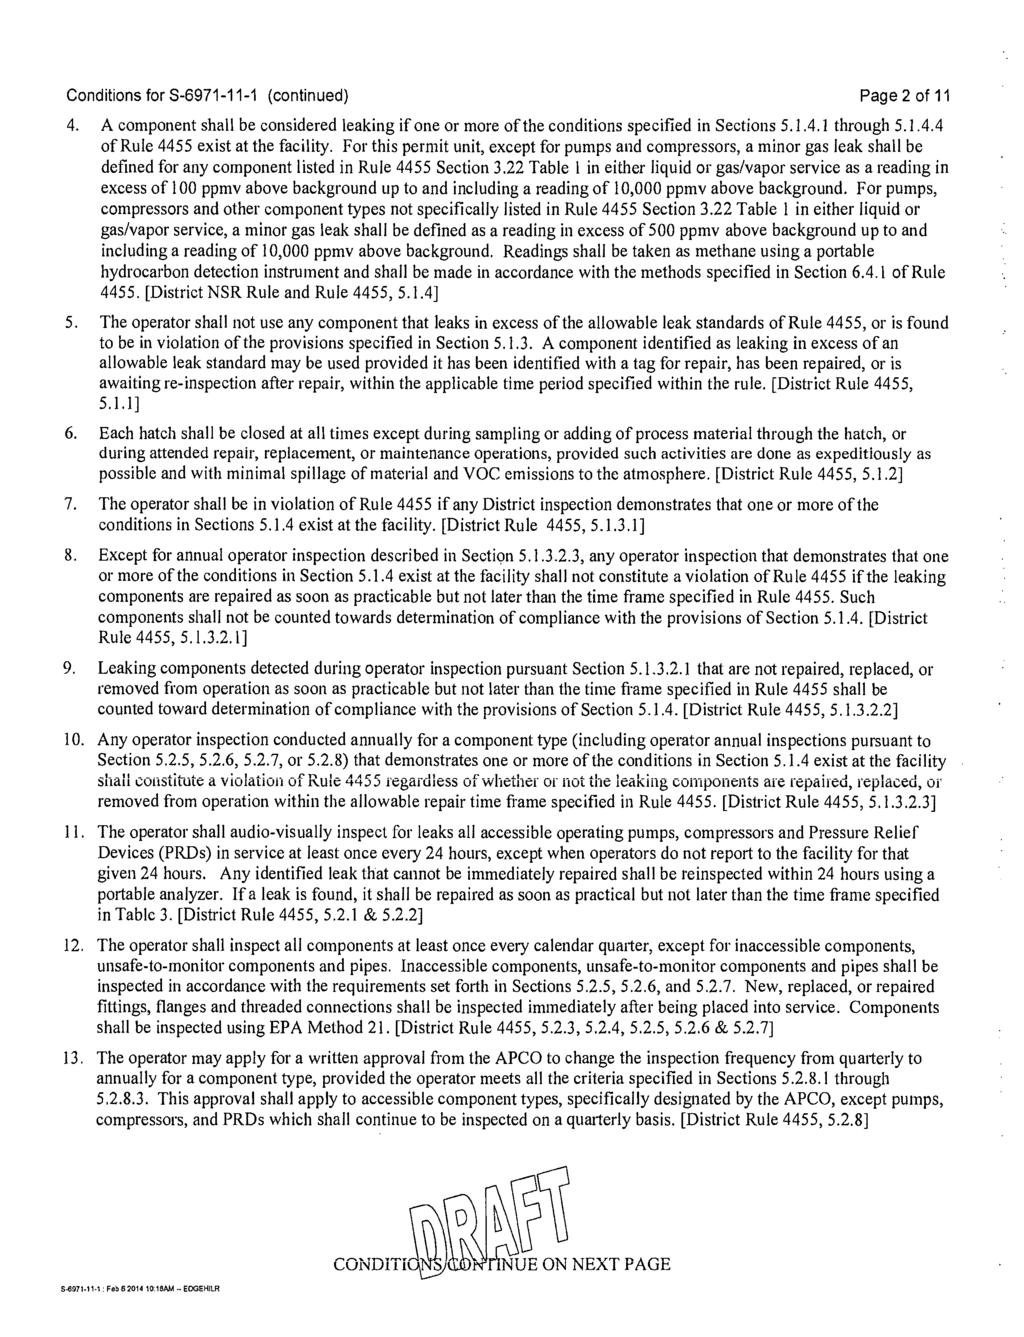 Conditions for S-6971-11-1 (continued) Page 2 of 11 4. A component shall be considered leaking if one or more of the conditions specified in Sections 5.1.4.1 through 5.1.4.4 of Rule 4455 exist at the facility.